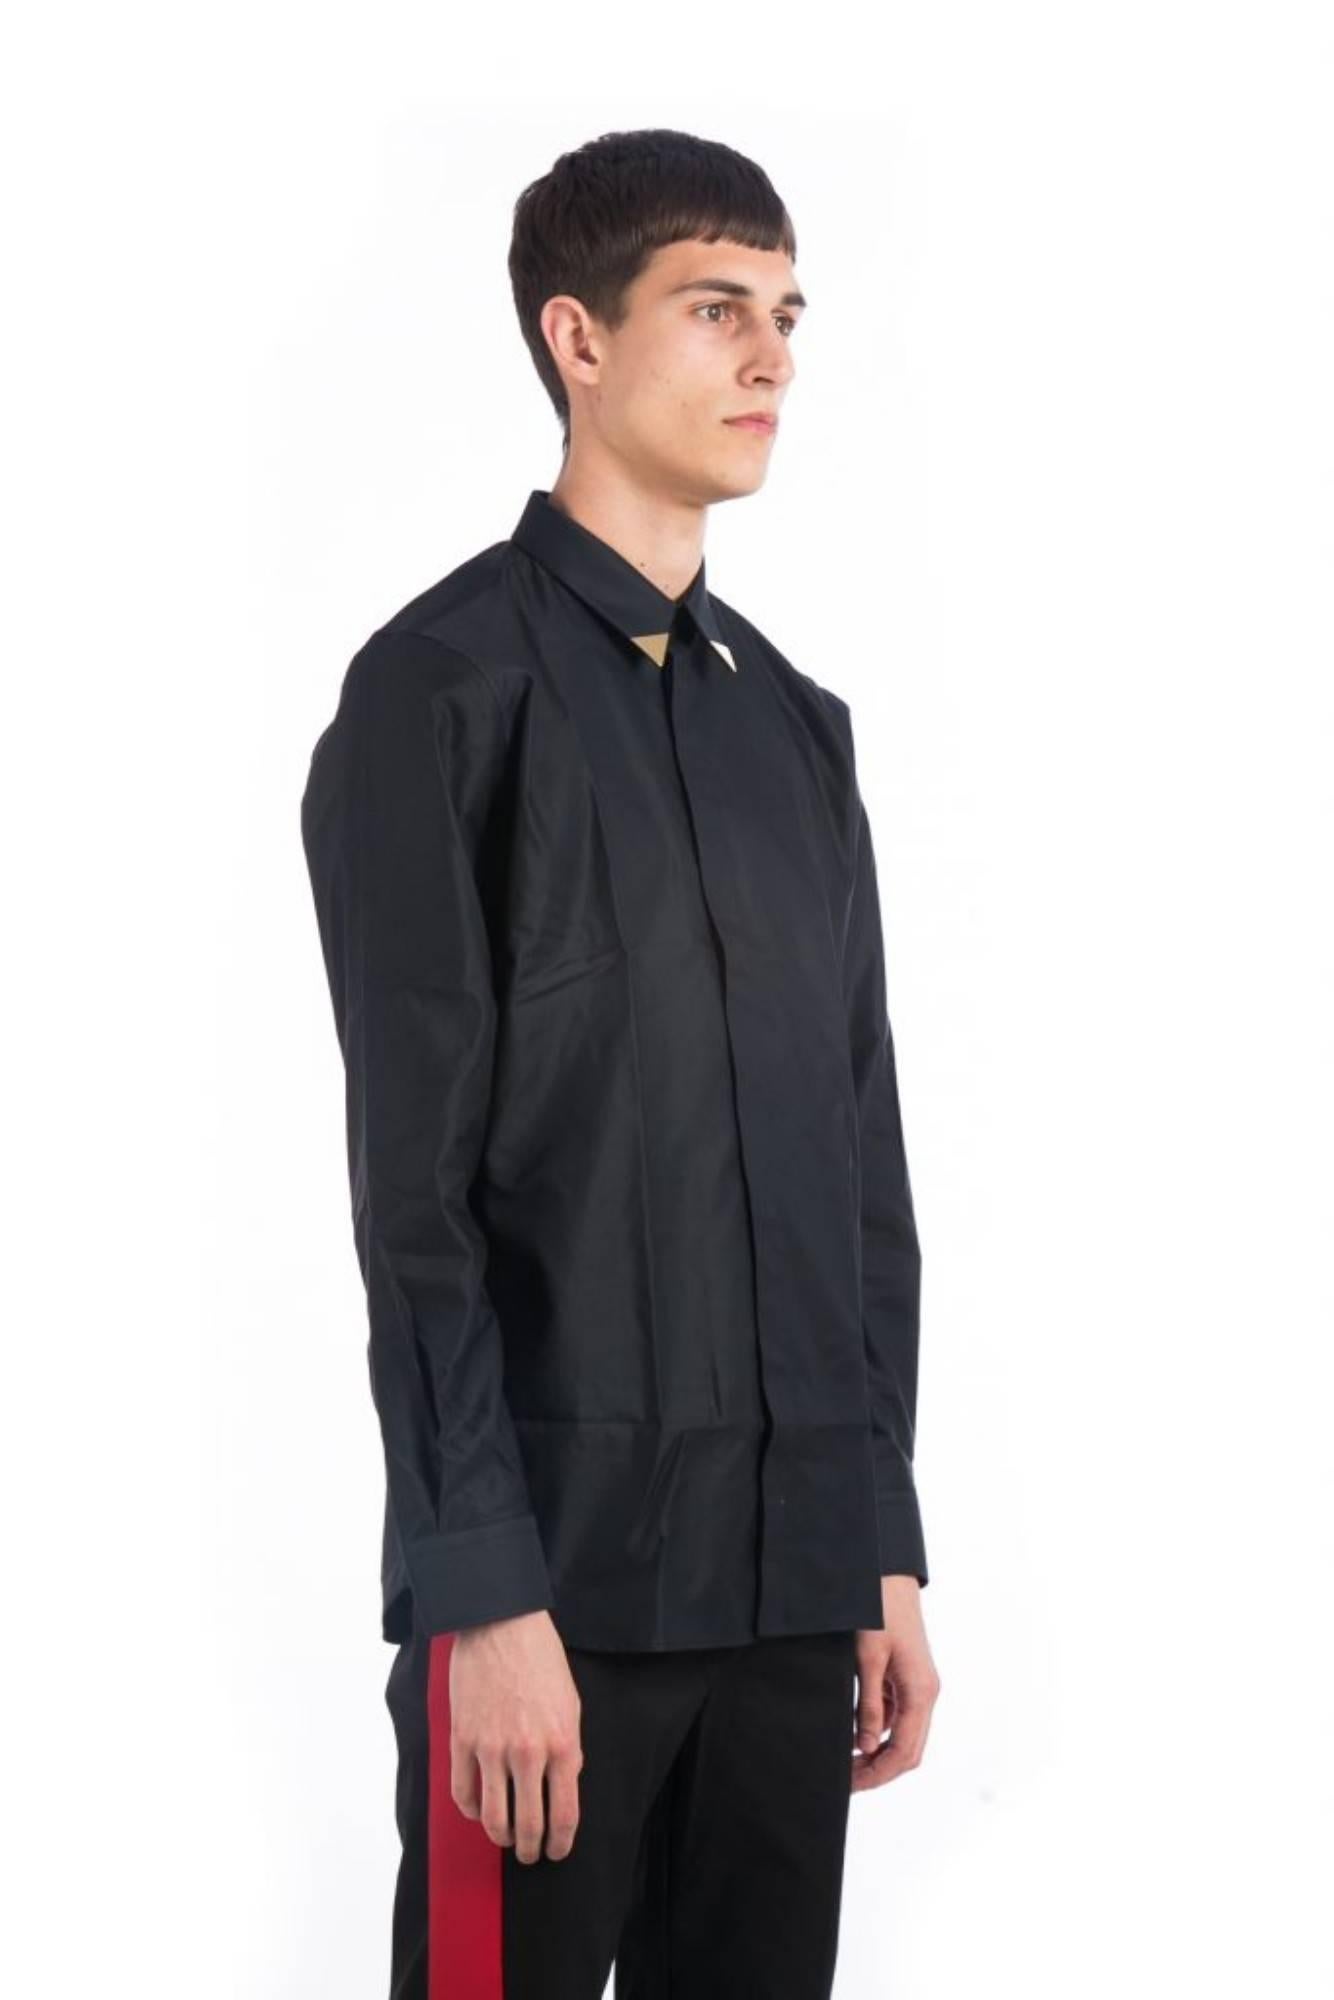 Metallic Tipped Collar Shirt
Black shirt
Metallic embelishments on the collar tips
Classic collar
Concealed front button placket
Long sleeves
Single button cuffs
Curved hemline
Composition 100% cotton